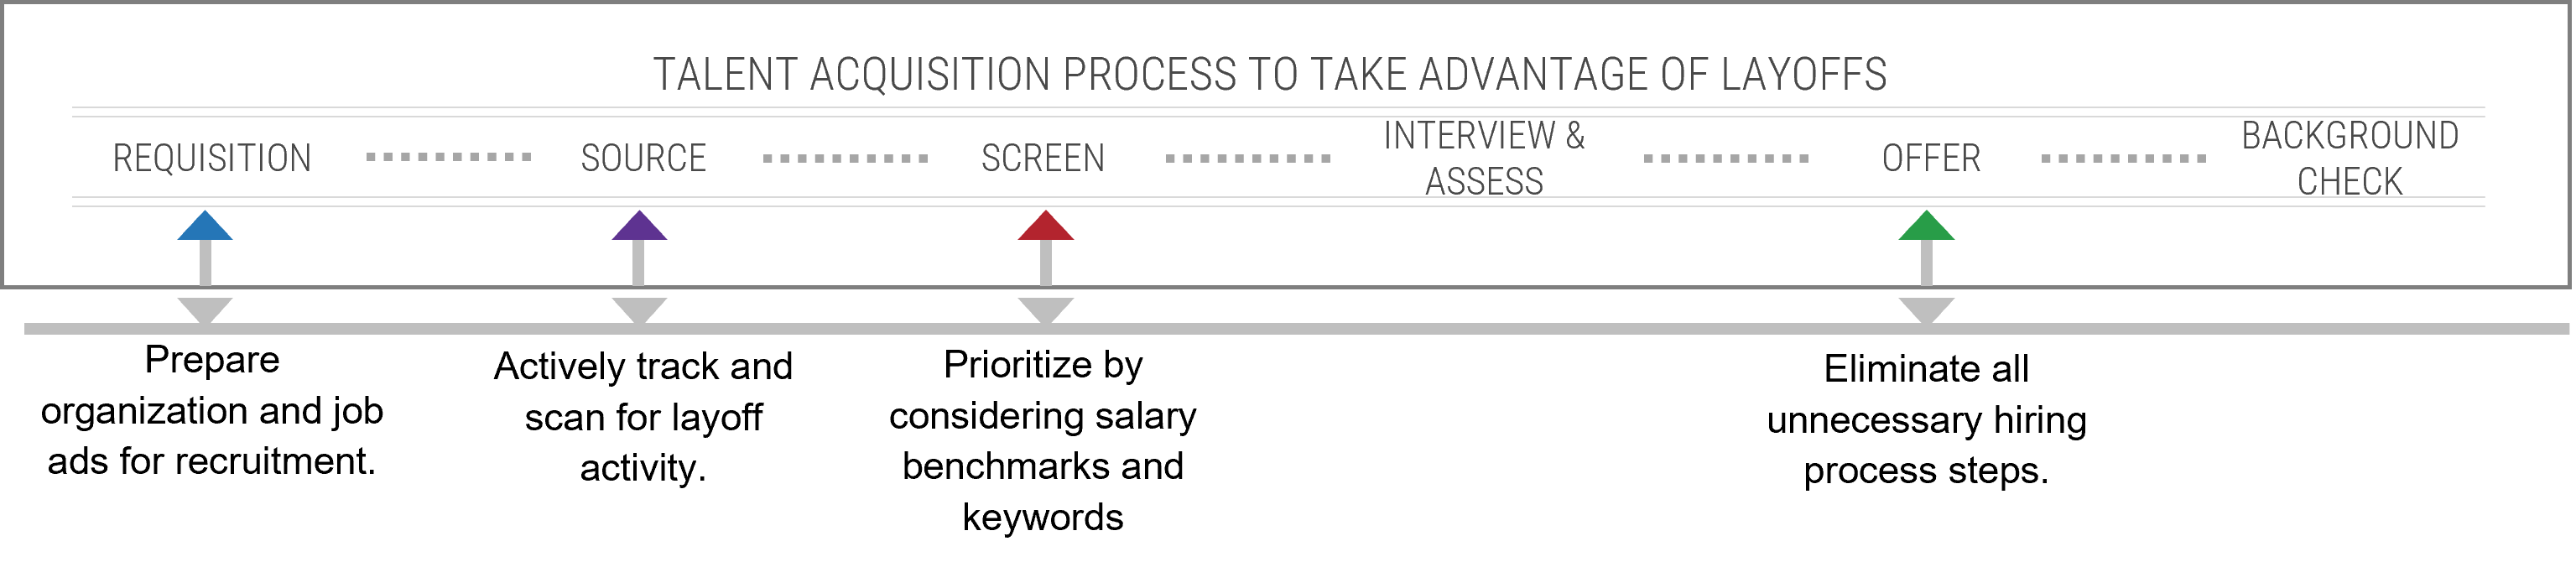 This is an image of the talent acquisition process to take advantage of layoffs. It involves the following fo steps: 1 Prepare organization and job ads for recrtment.  2 Actively track and scan for layoff aivity.  3 Prioritize and screen candidates using salary benchmarks and kwords.  4 Eliminate all unnecessary hiring process steps.